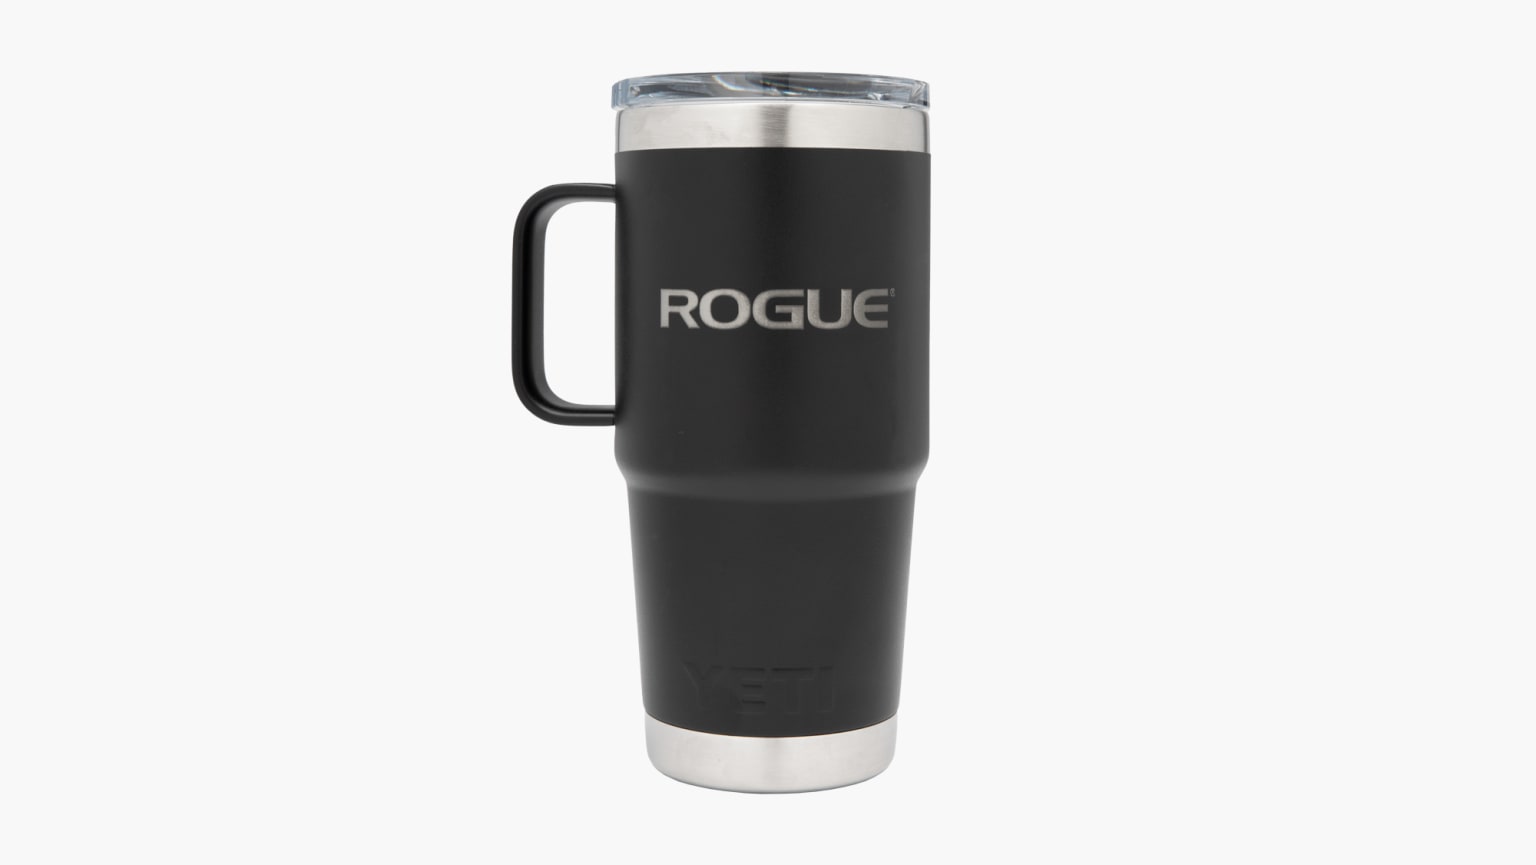 https://assets.roguefitness.com/f_auto,q_auto,c_limit,w_1536,b_rgb:f8f8f8/catalog/Gear%20and%20Accessories/Accessories/Shakers%20and%20Bottles/YT0079/YT0079-H_zt9py5.png